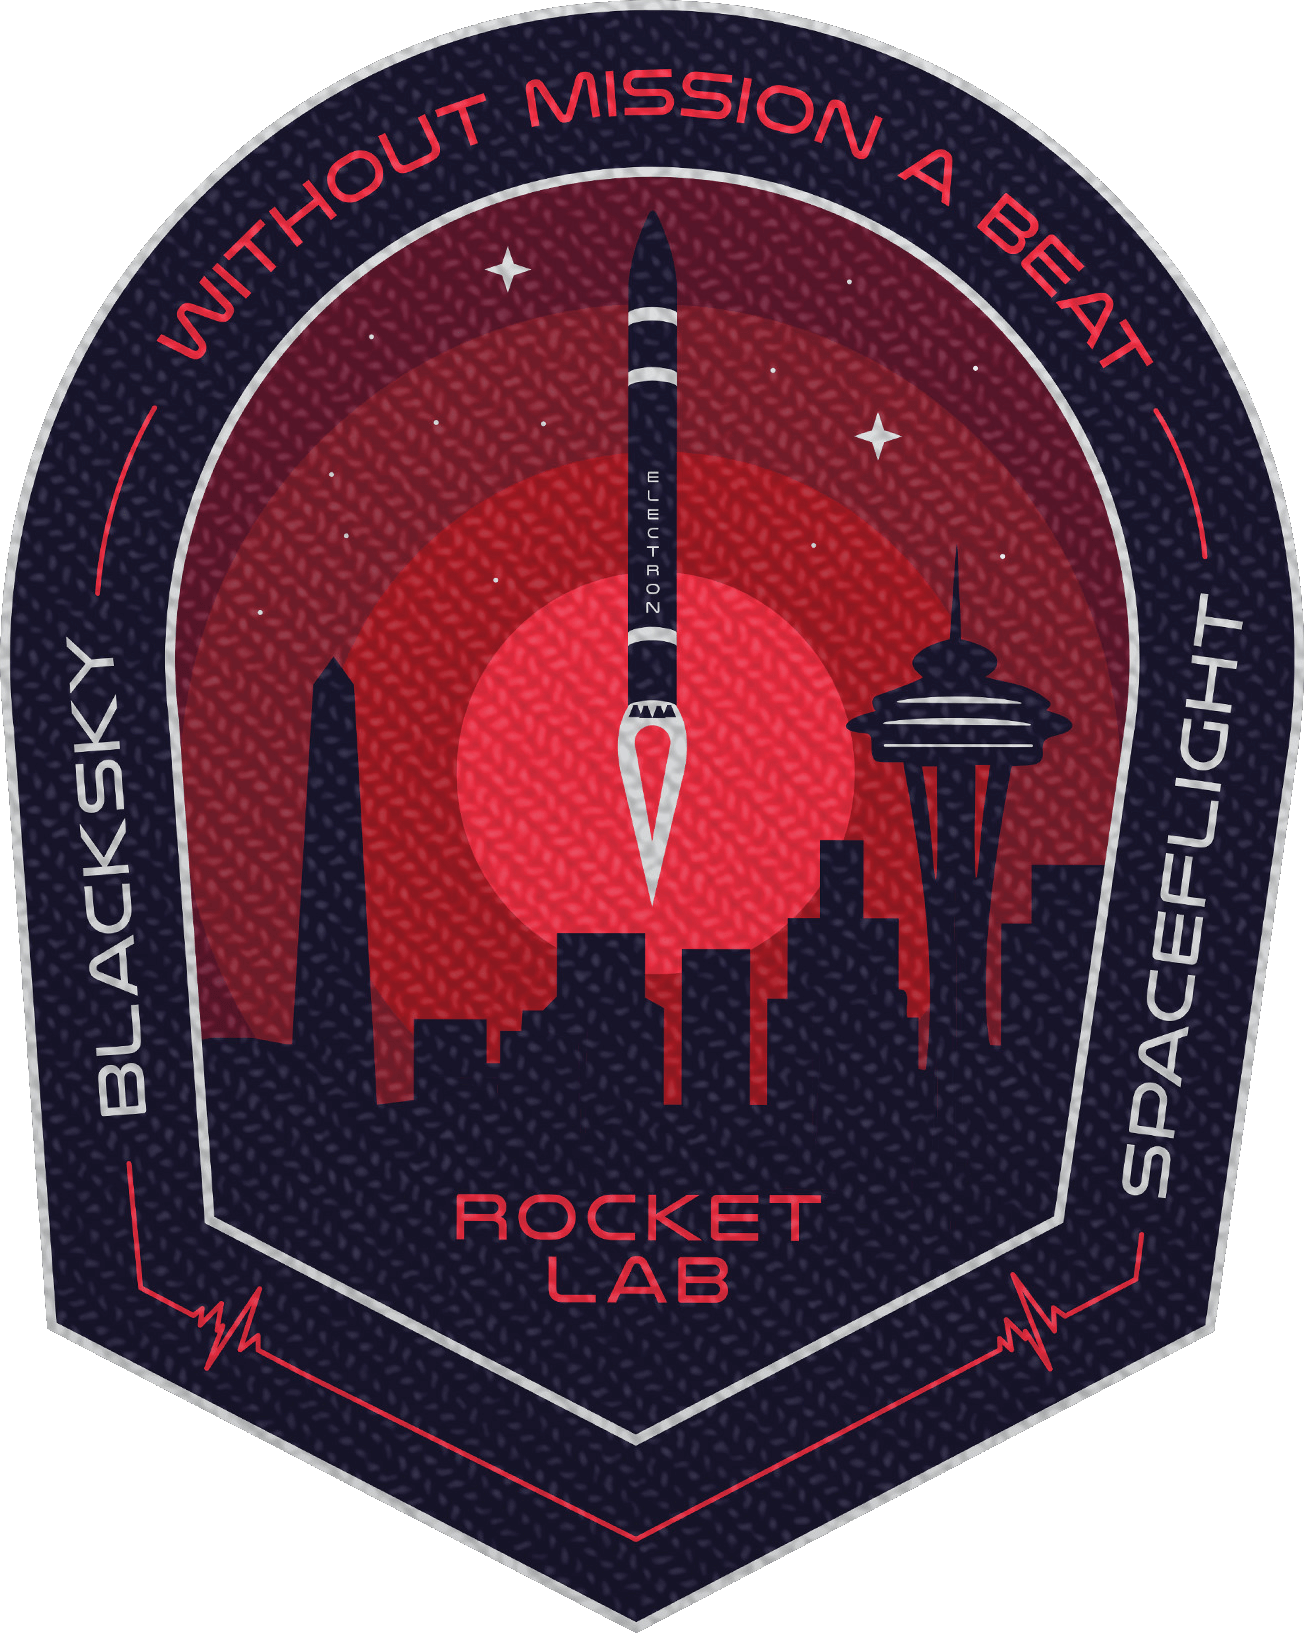 Mission patch for Without Mission A Beat